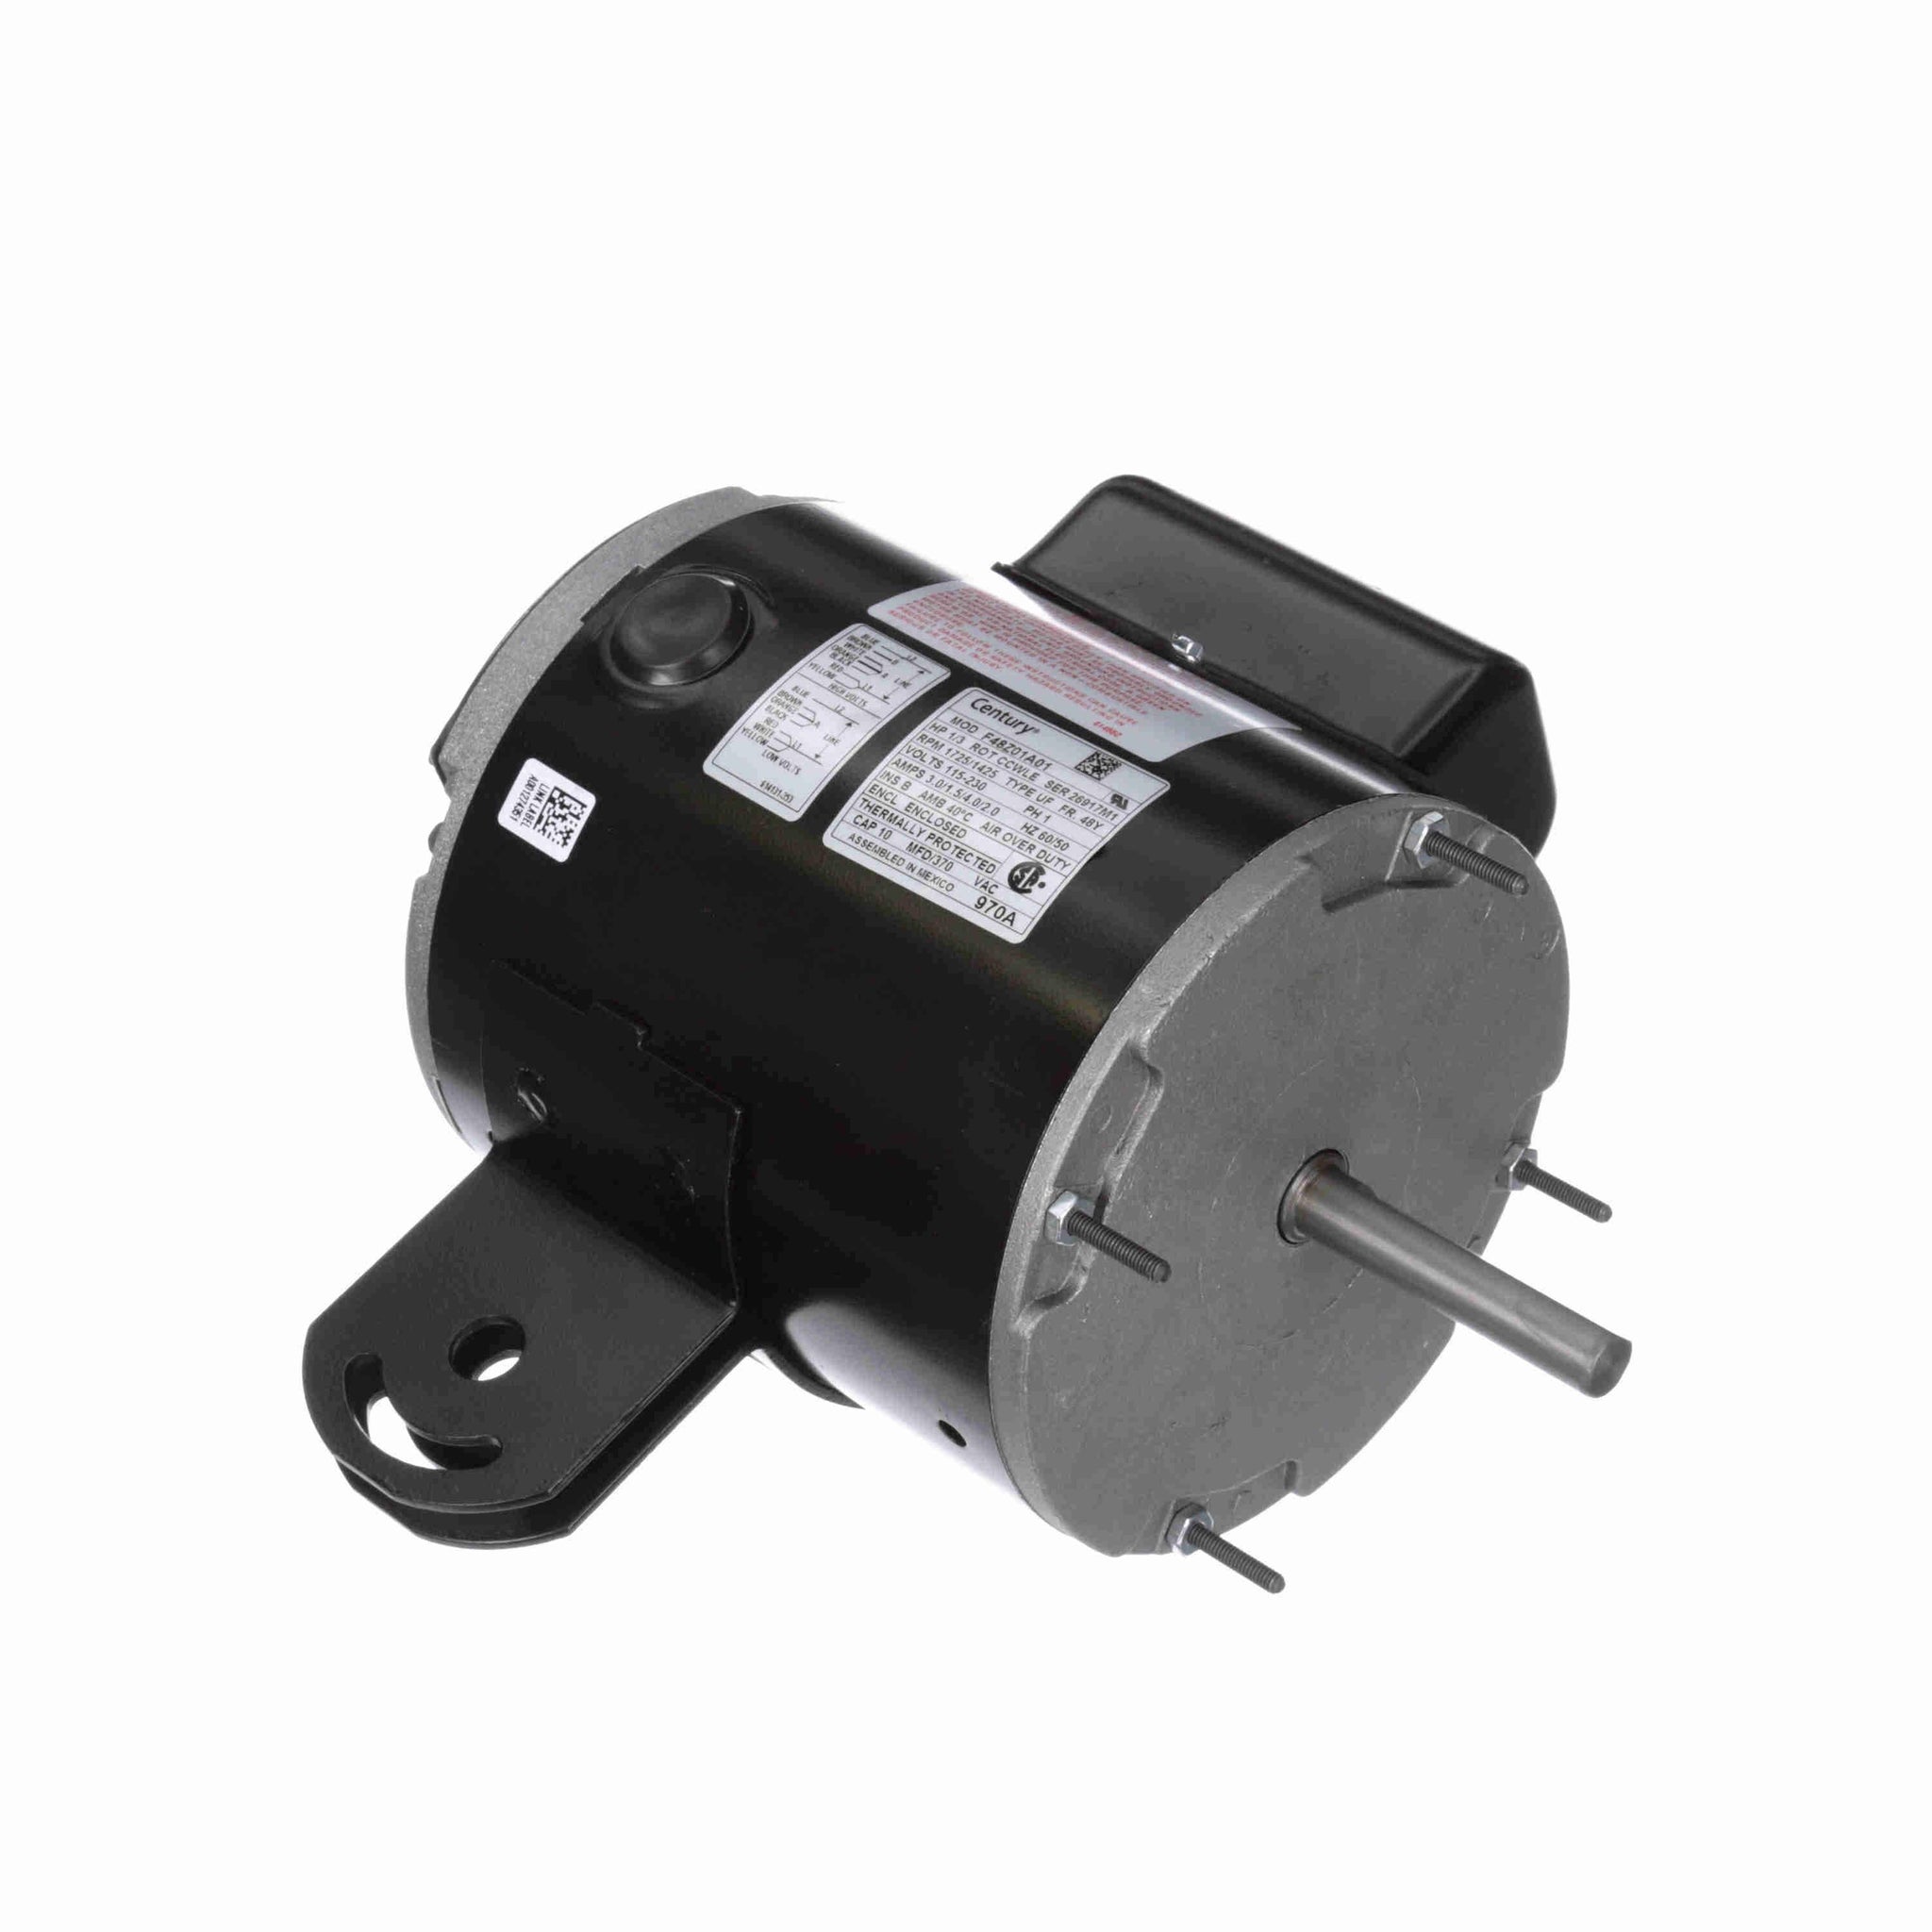 970A -  1/3 HP OEM Replacement Motor, 1725/1425 RPM, 2 Speed, 115/230 Volts, 48 Frame, TEAO - Hardware & Moreee